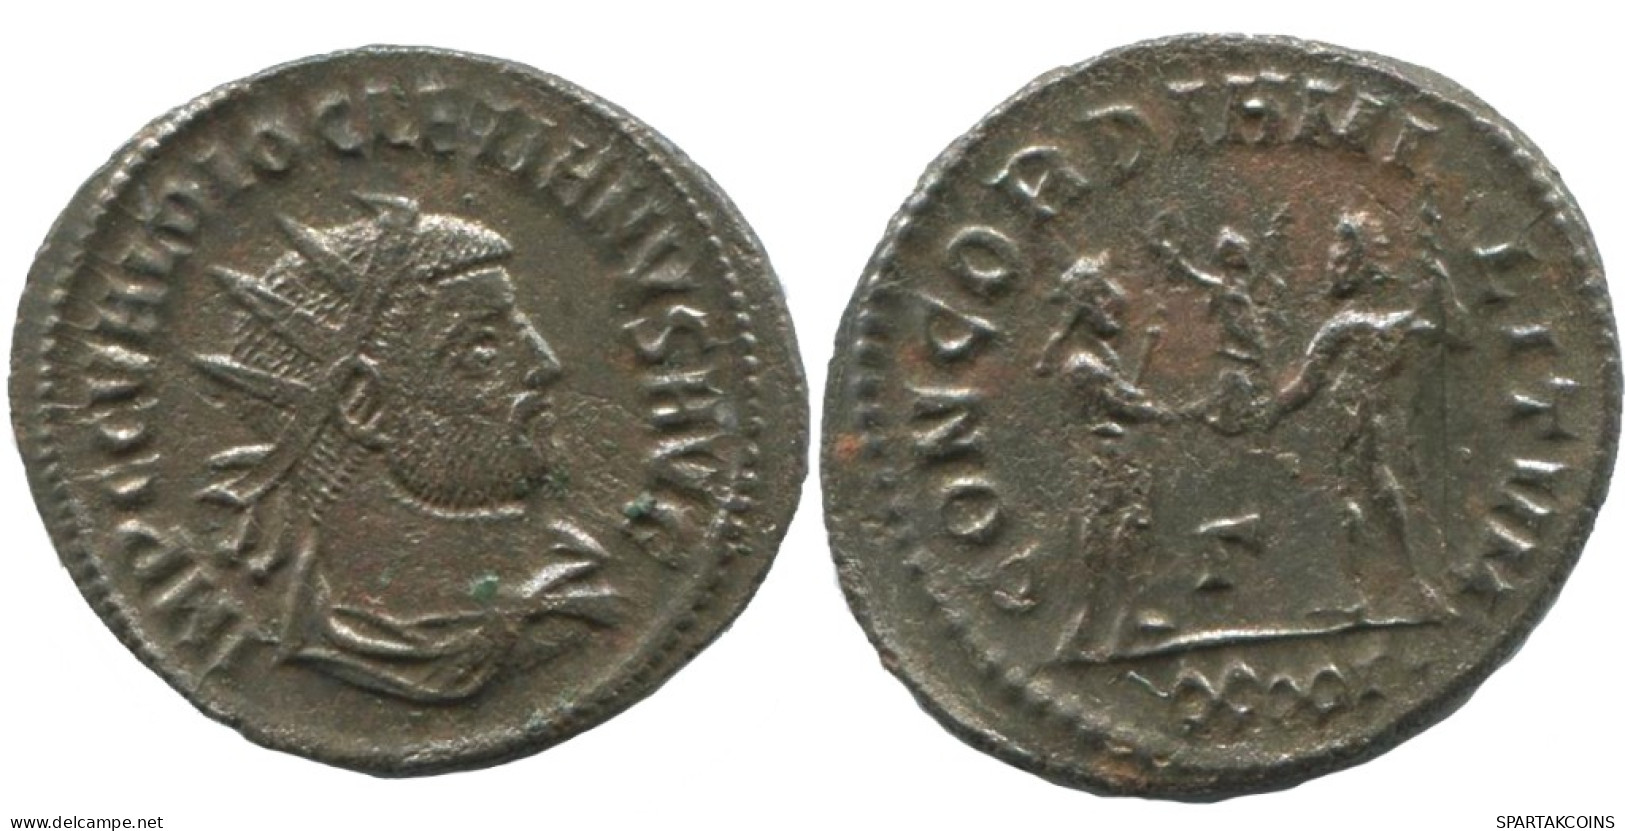 DIOCLETIAN ANTONINIANUS Heraclea (?/XXI) AD291 CONCORDIA MILITVM #ANT1879.48.E.A - The Tetrarchy (284 AD To 307 AD)